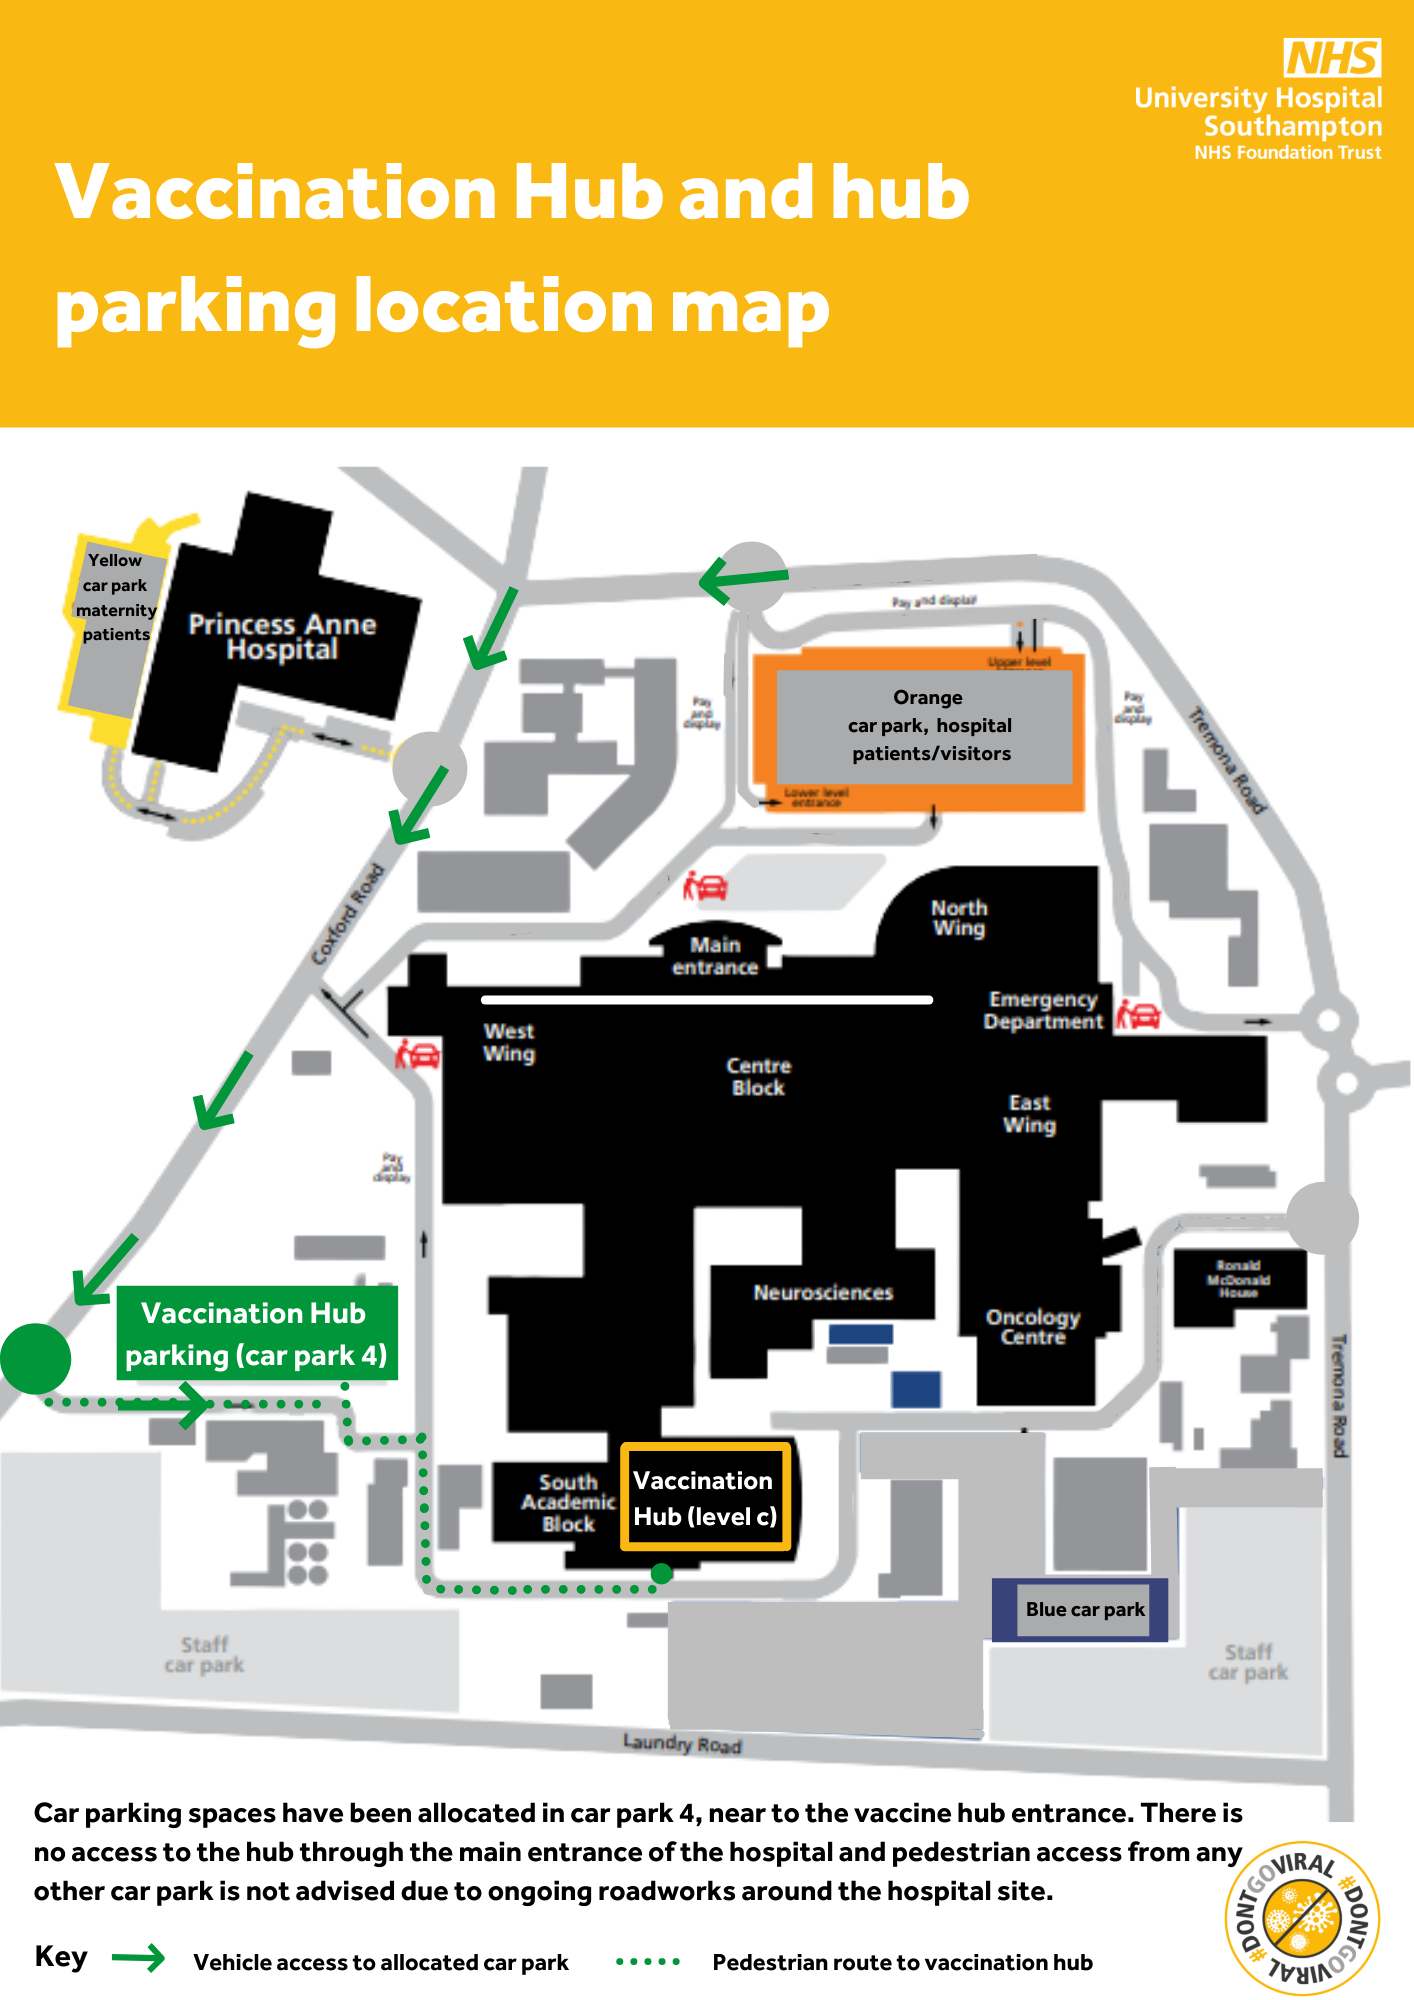 Location of vaccination hub at UHS